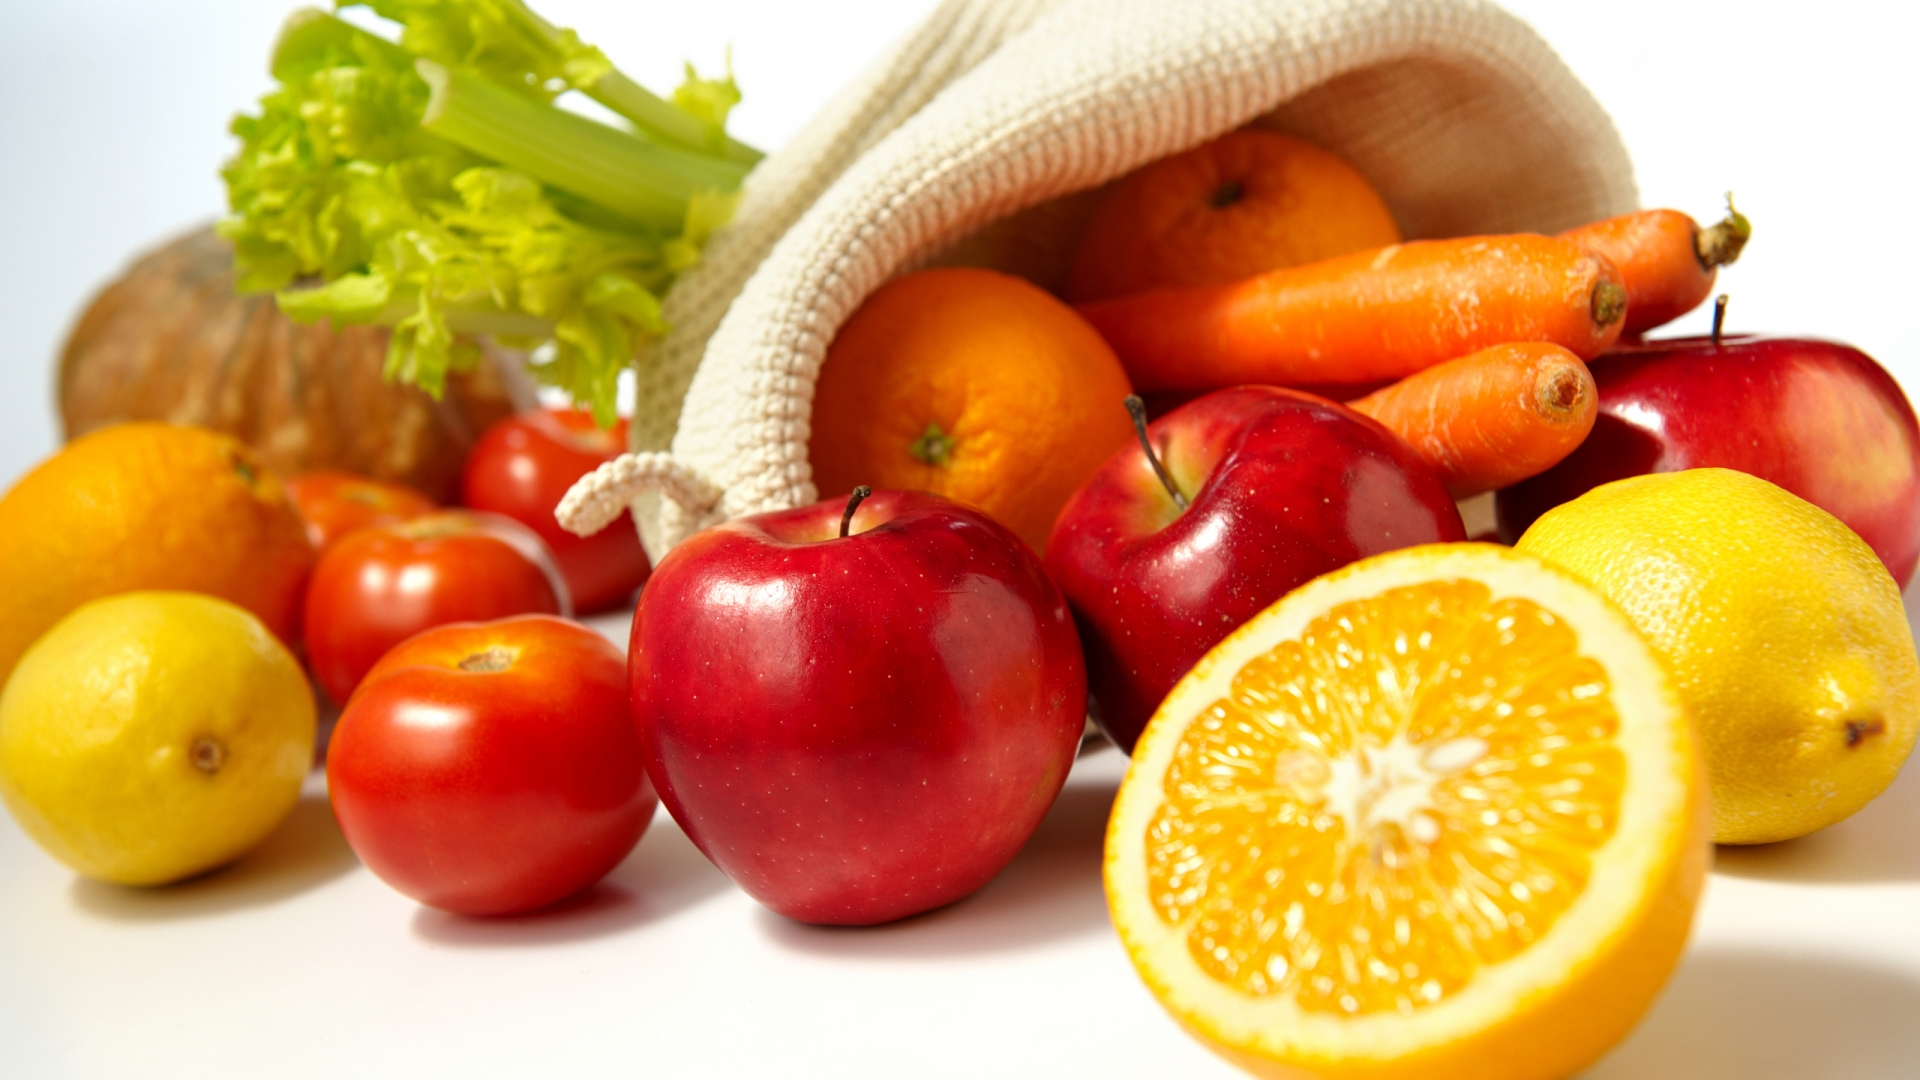 Fruits and Vegetables for 1920 x 1080 HDTV 1080p resolution